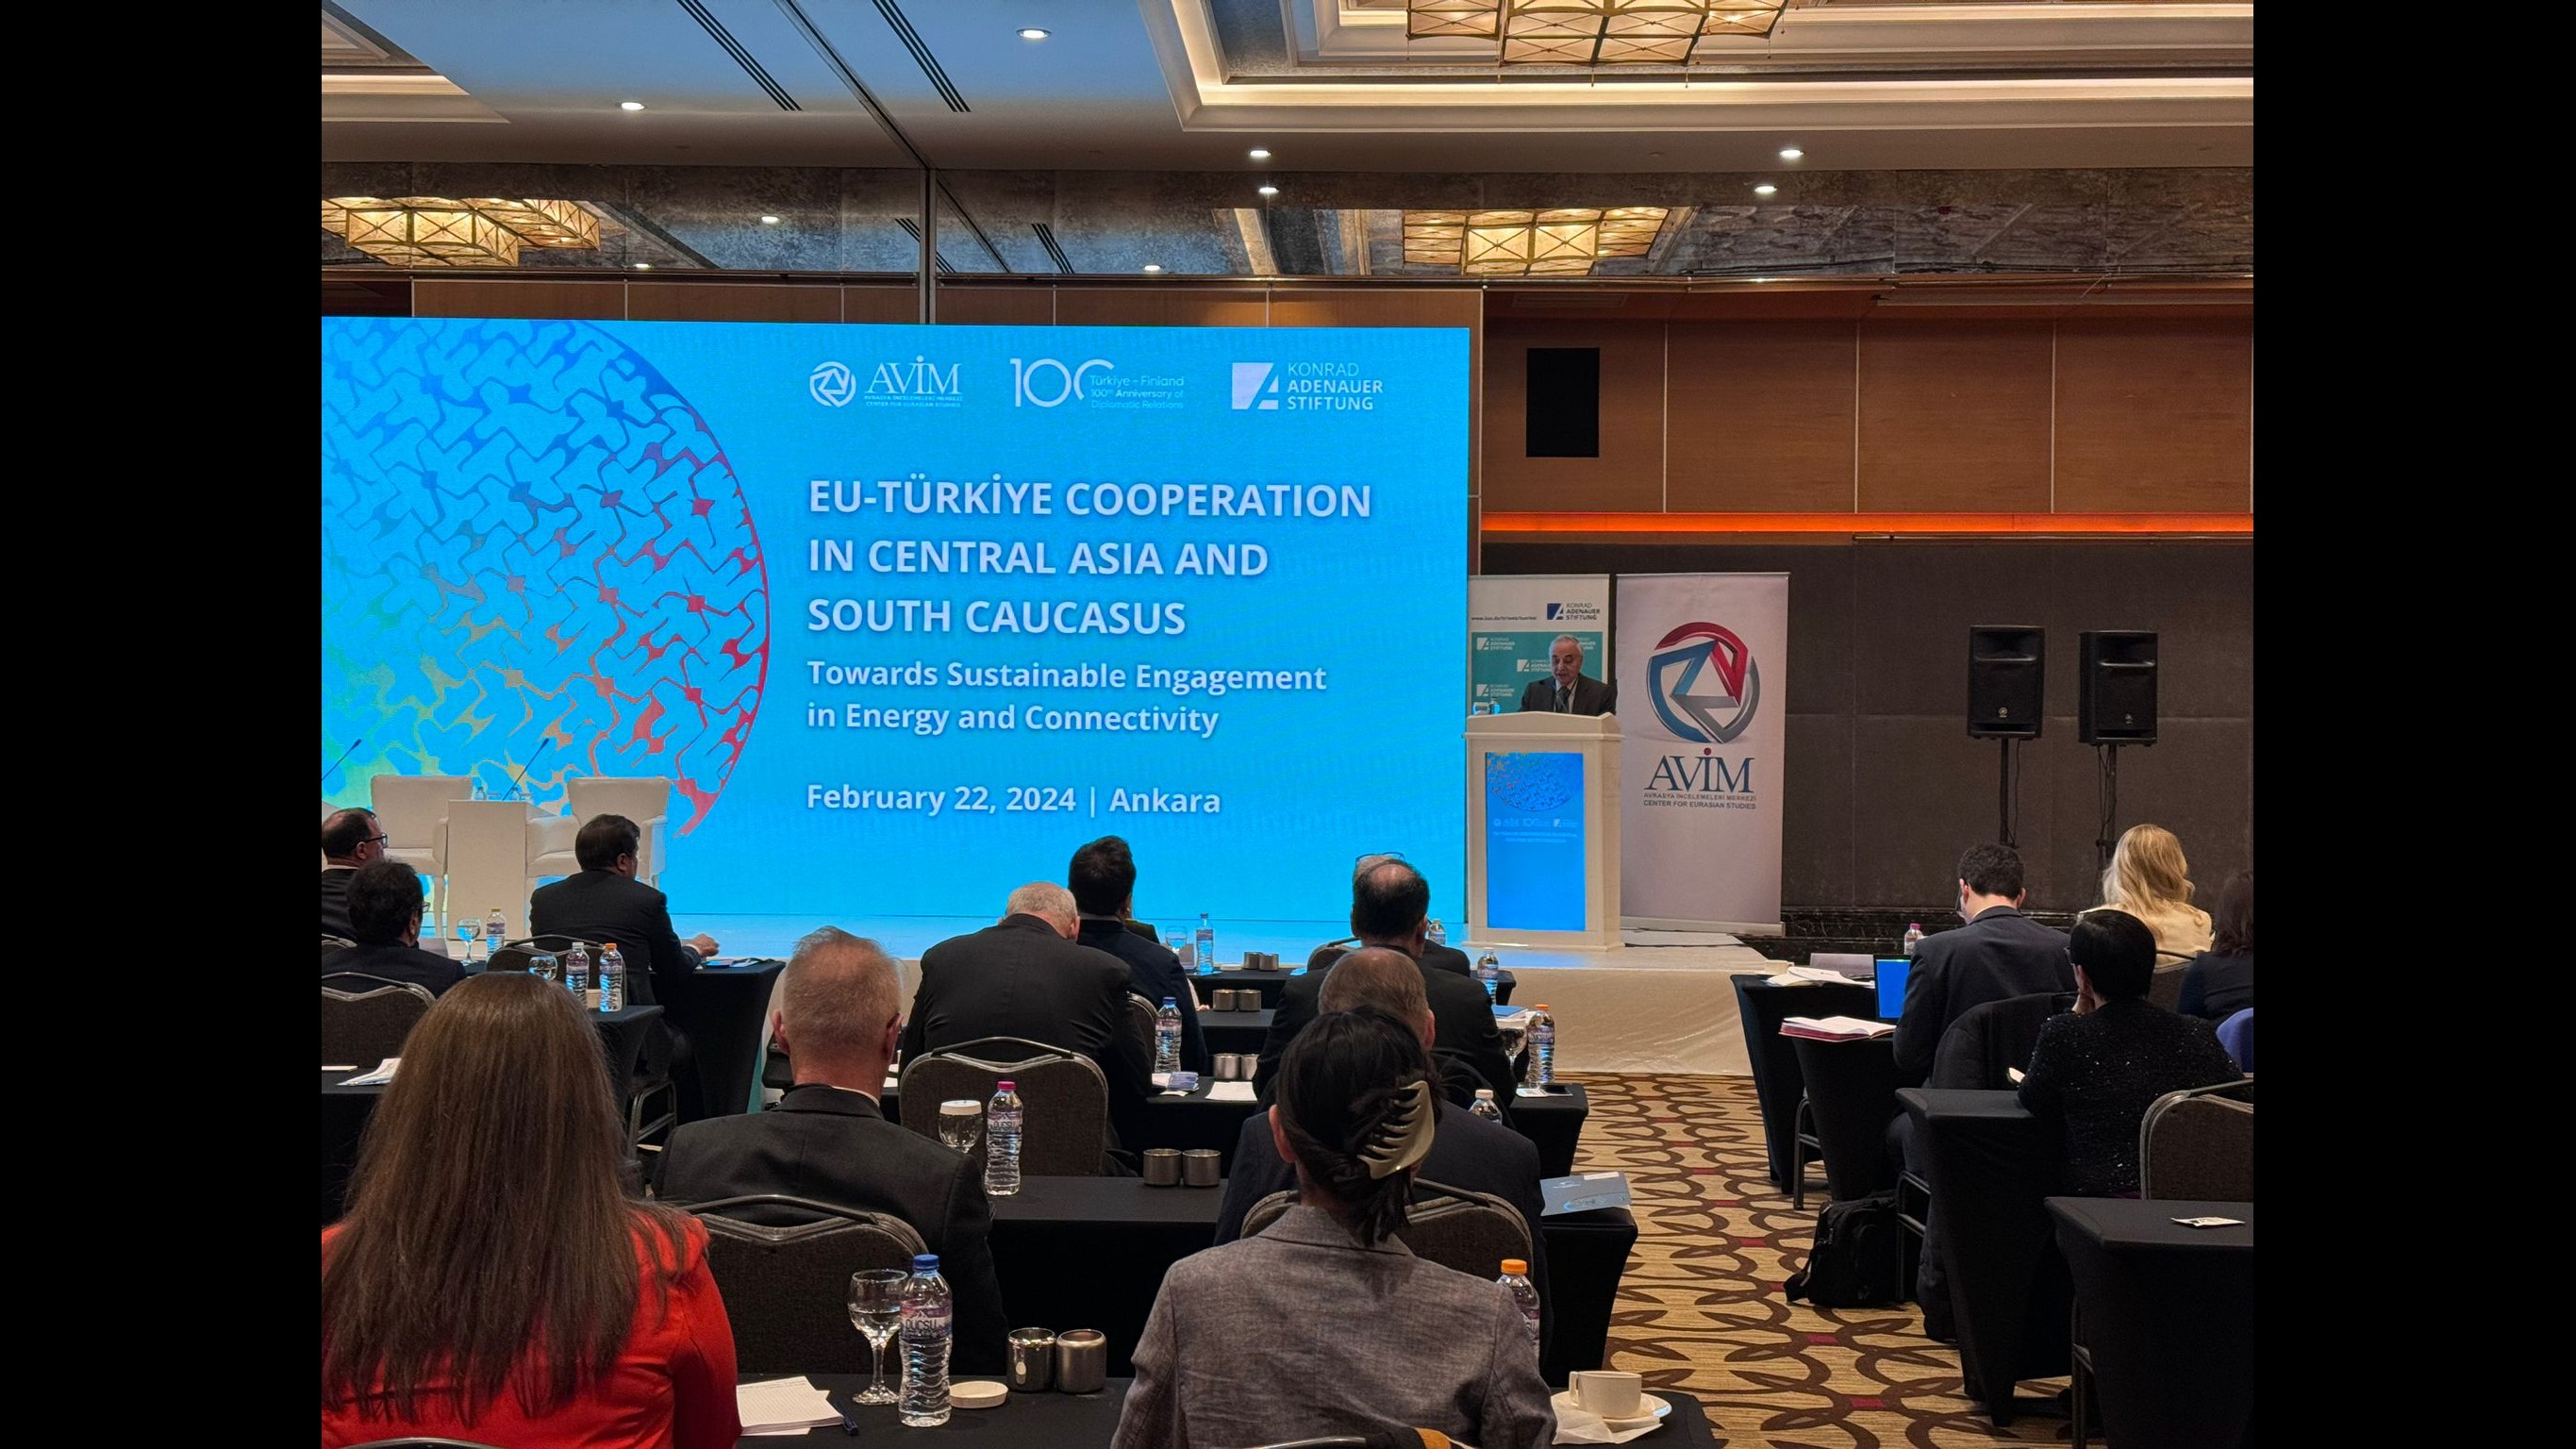 ANNOUNCEMENT: AVİM-KAS TÜRKİYE JOINT CONFERENCE ON “EU-TÜRKİYE COOPERATION IN CENTRAL ASIA AND SOUTH CAUCASUS: TOWARDS SUSTAINABLE ENGAGEMENT IN ENERGY AND CONNECTIVITY”